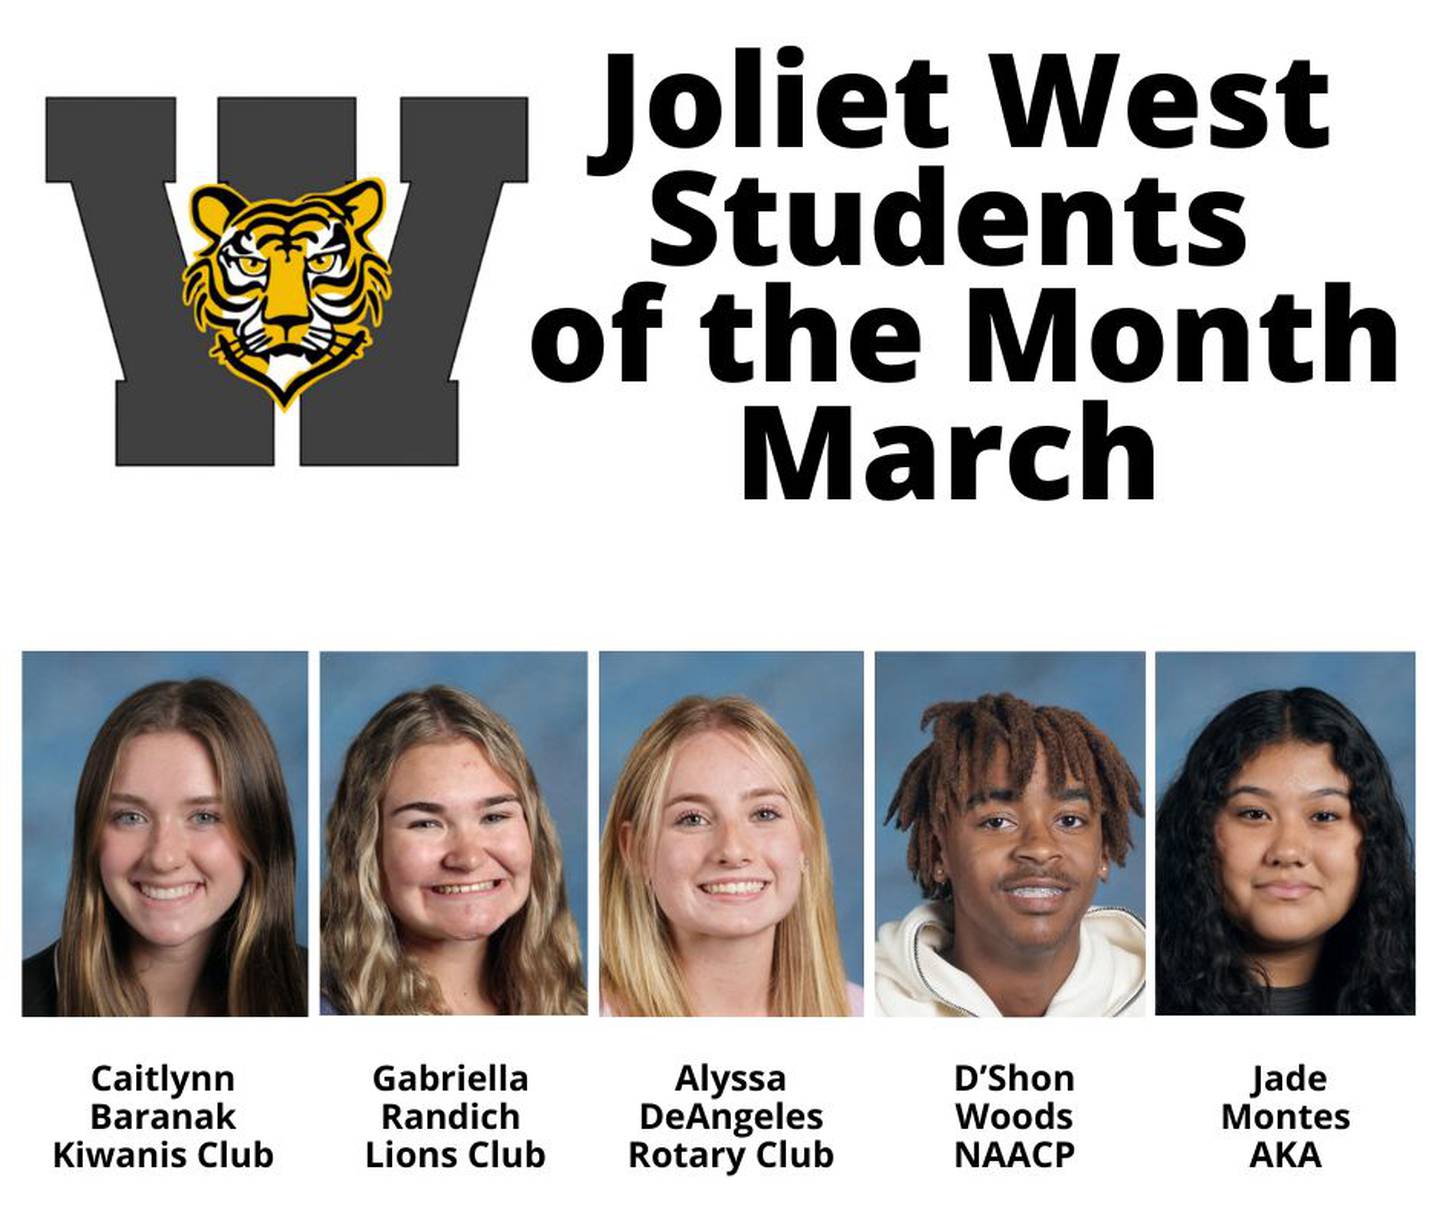 The Joliet West High School Students of the Month for March 2024 are Caitlynn Baranak, Gabriella Randich, Alyssa DeAngeles, D’Shon Woods and Jade Montes.